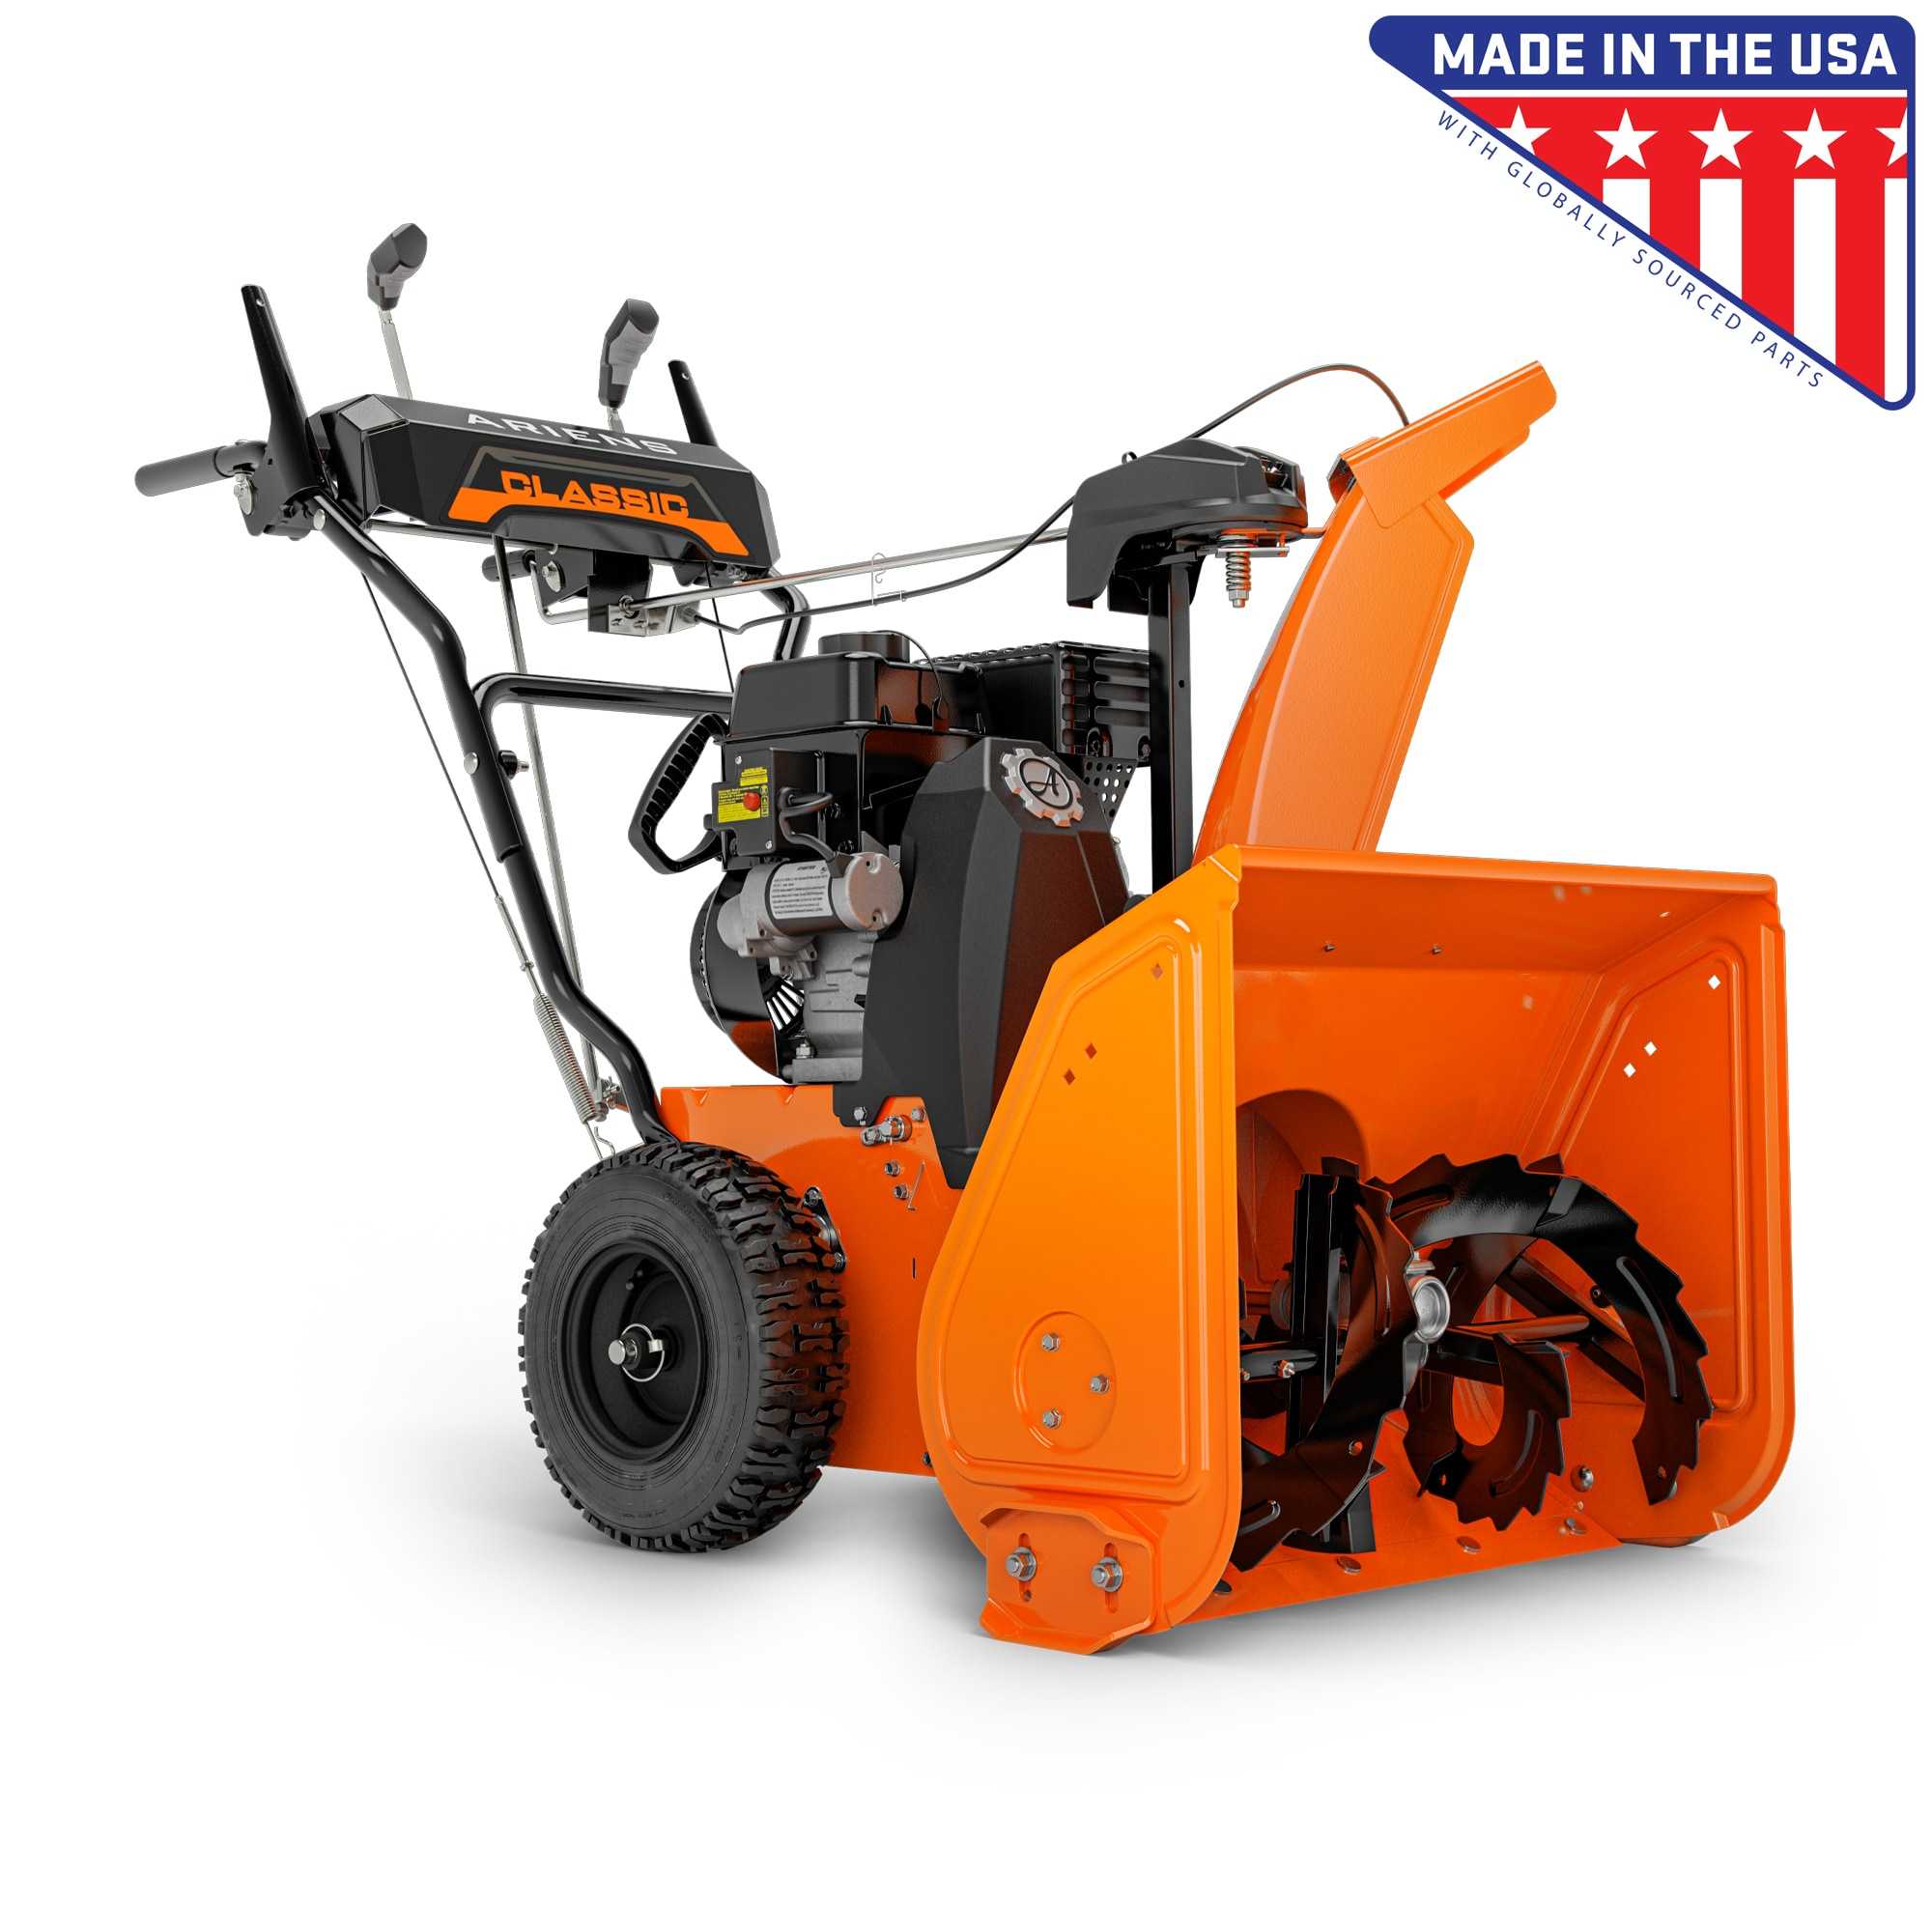 Ariens Classic 24-in Two-stage Self-propelled Gas Snow Blower in Orange | 920025